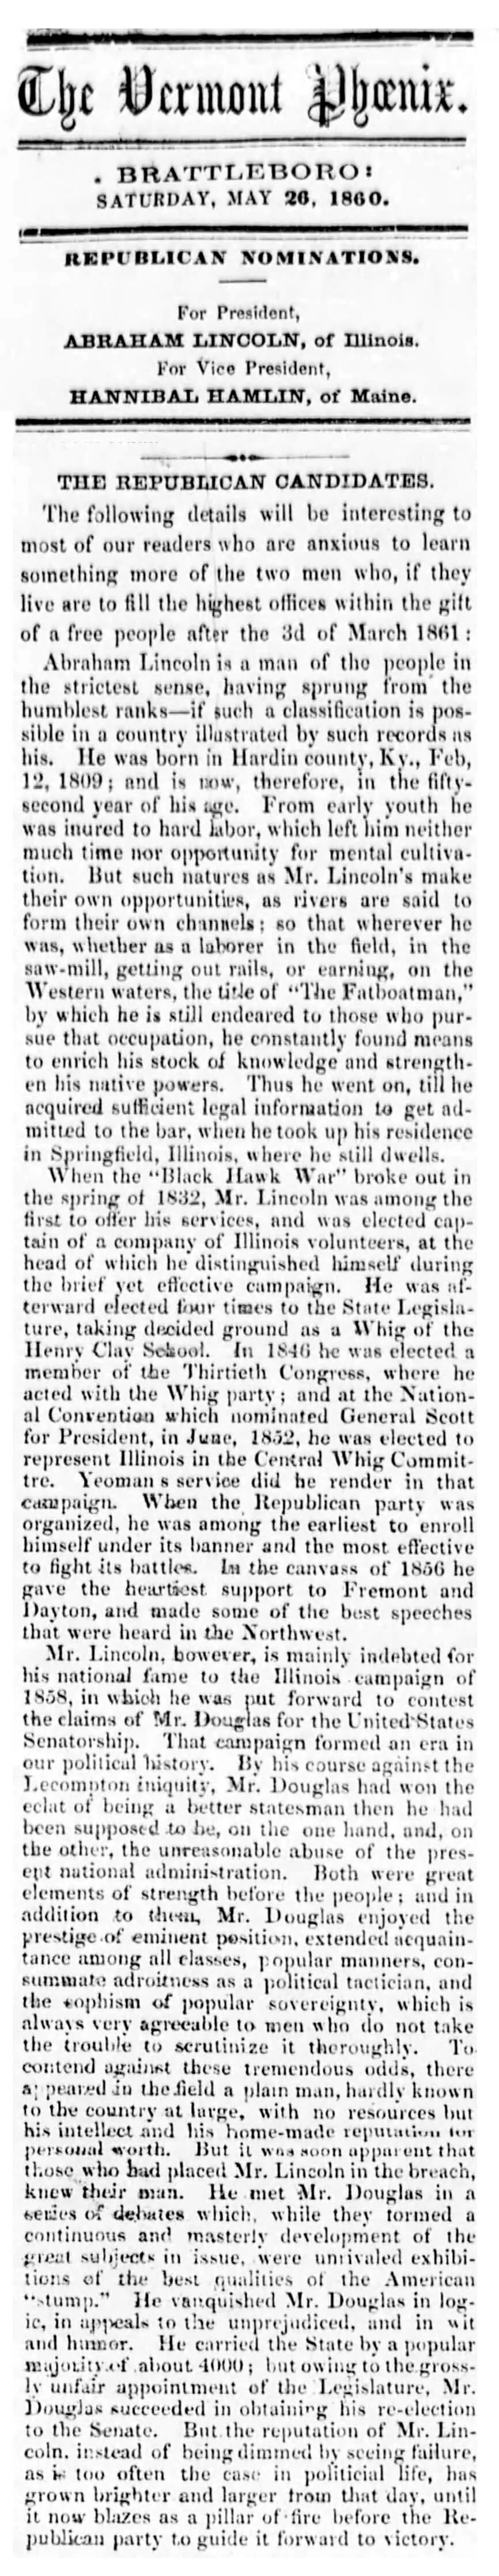 Newspaper clipping from the Vermont Phoenix about Lincoln's life and reputation.